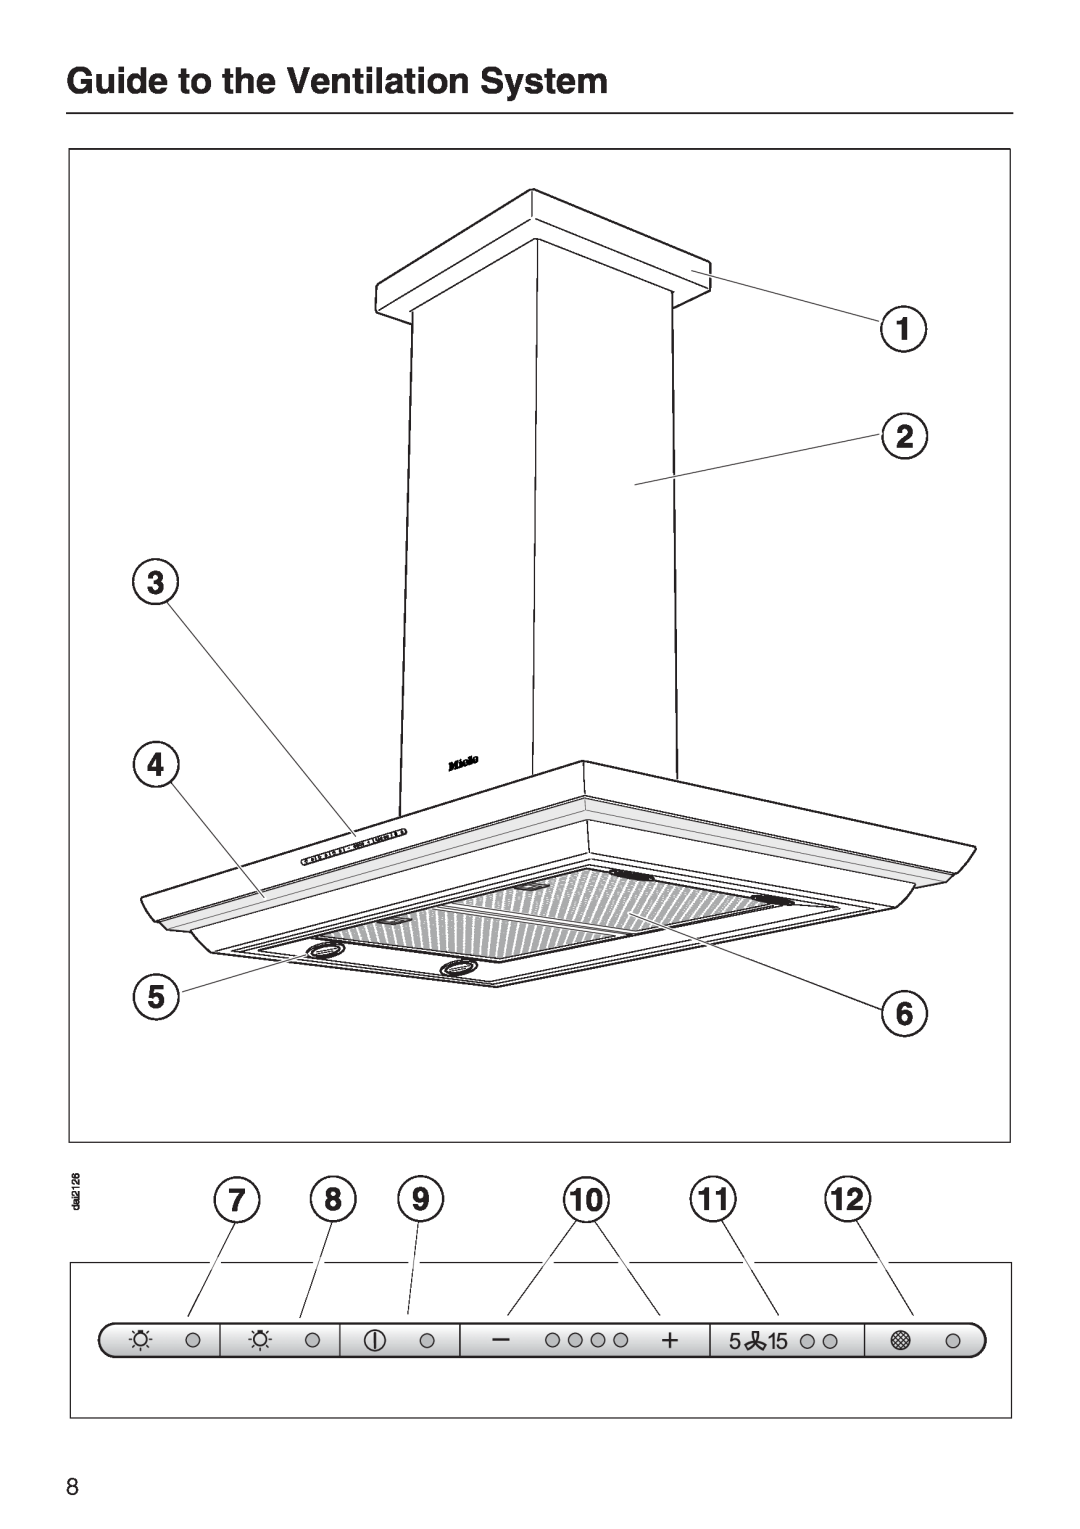 Miele ventilation system, DA 270-4 installation instructions Guide to the Ventilation System 